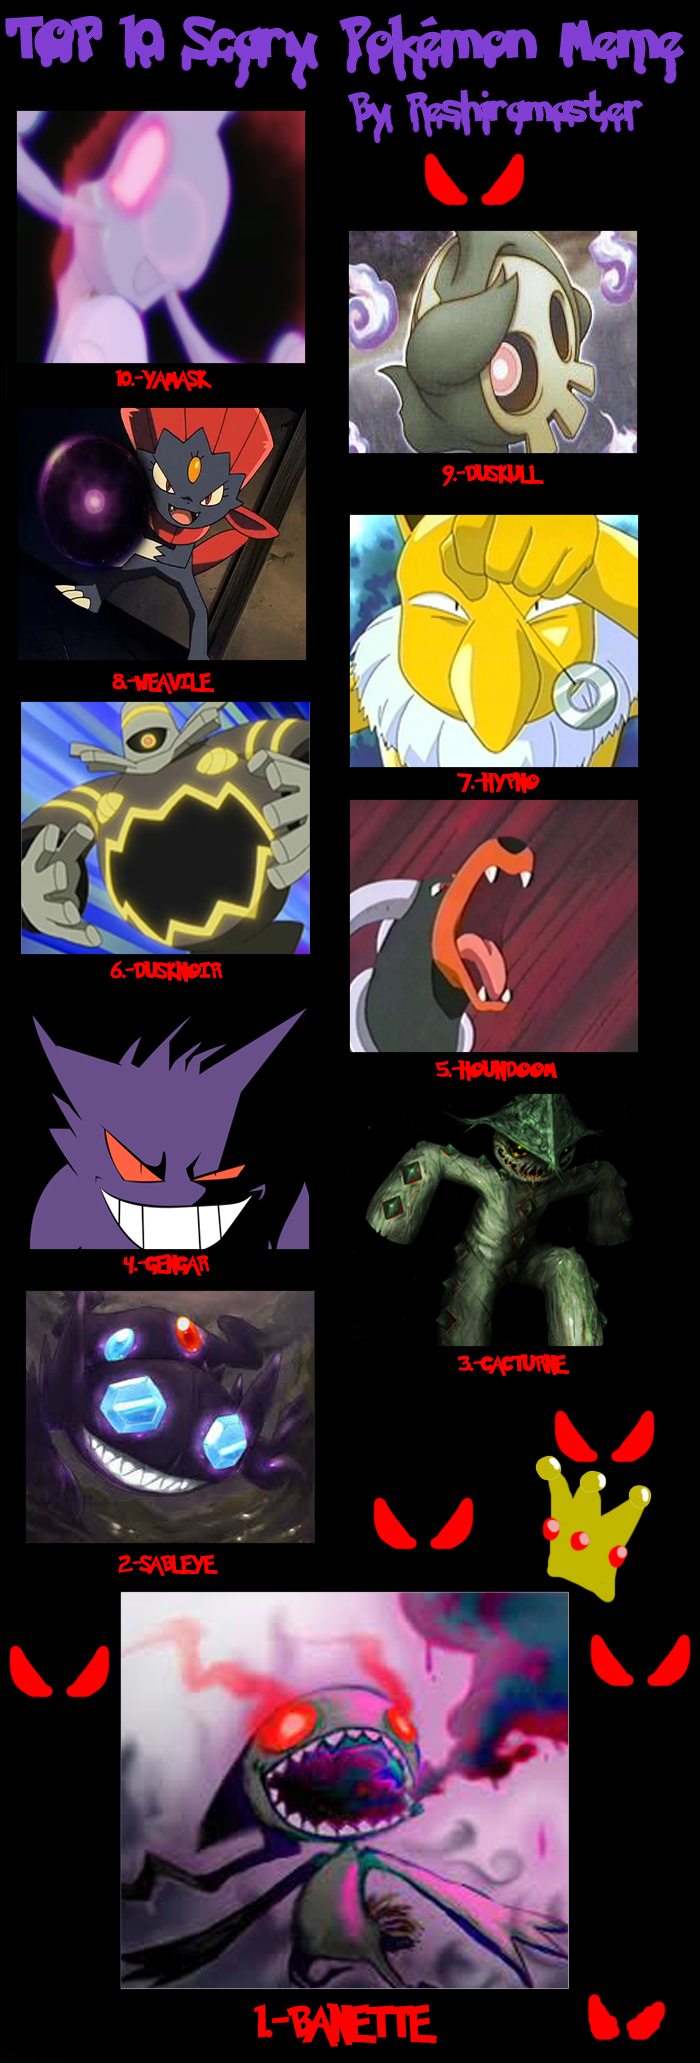 Funny/scary faces in pokemon by Kabutopsthebadd on DeviantArt